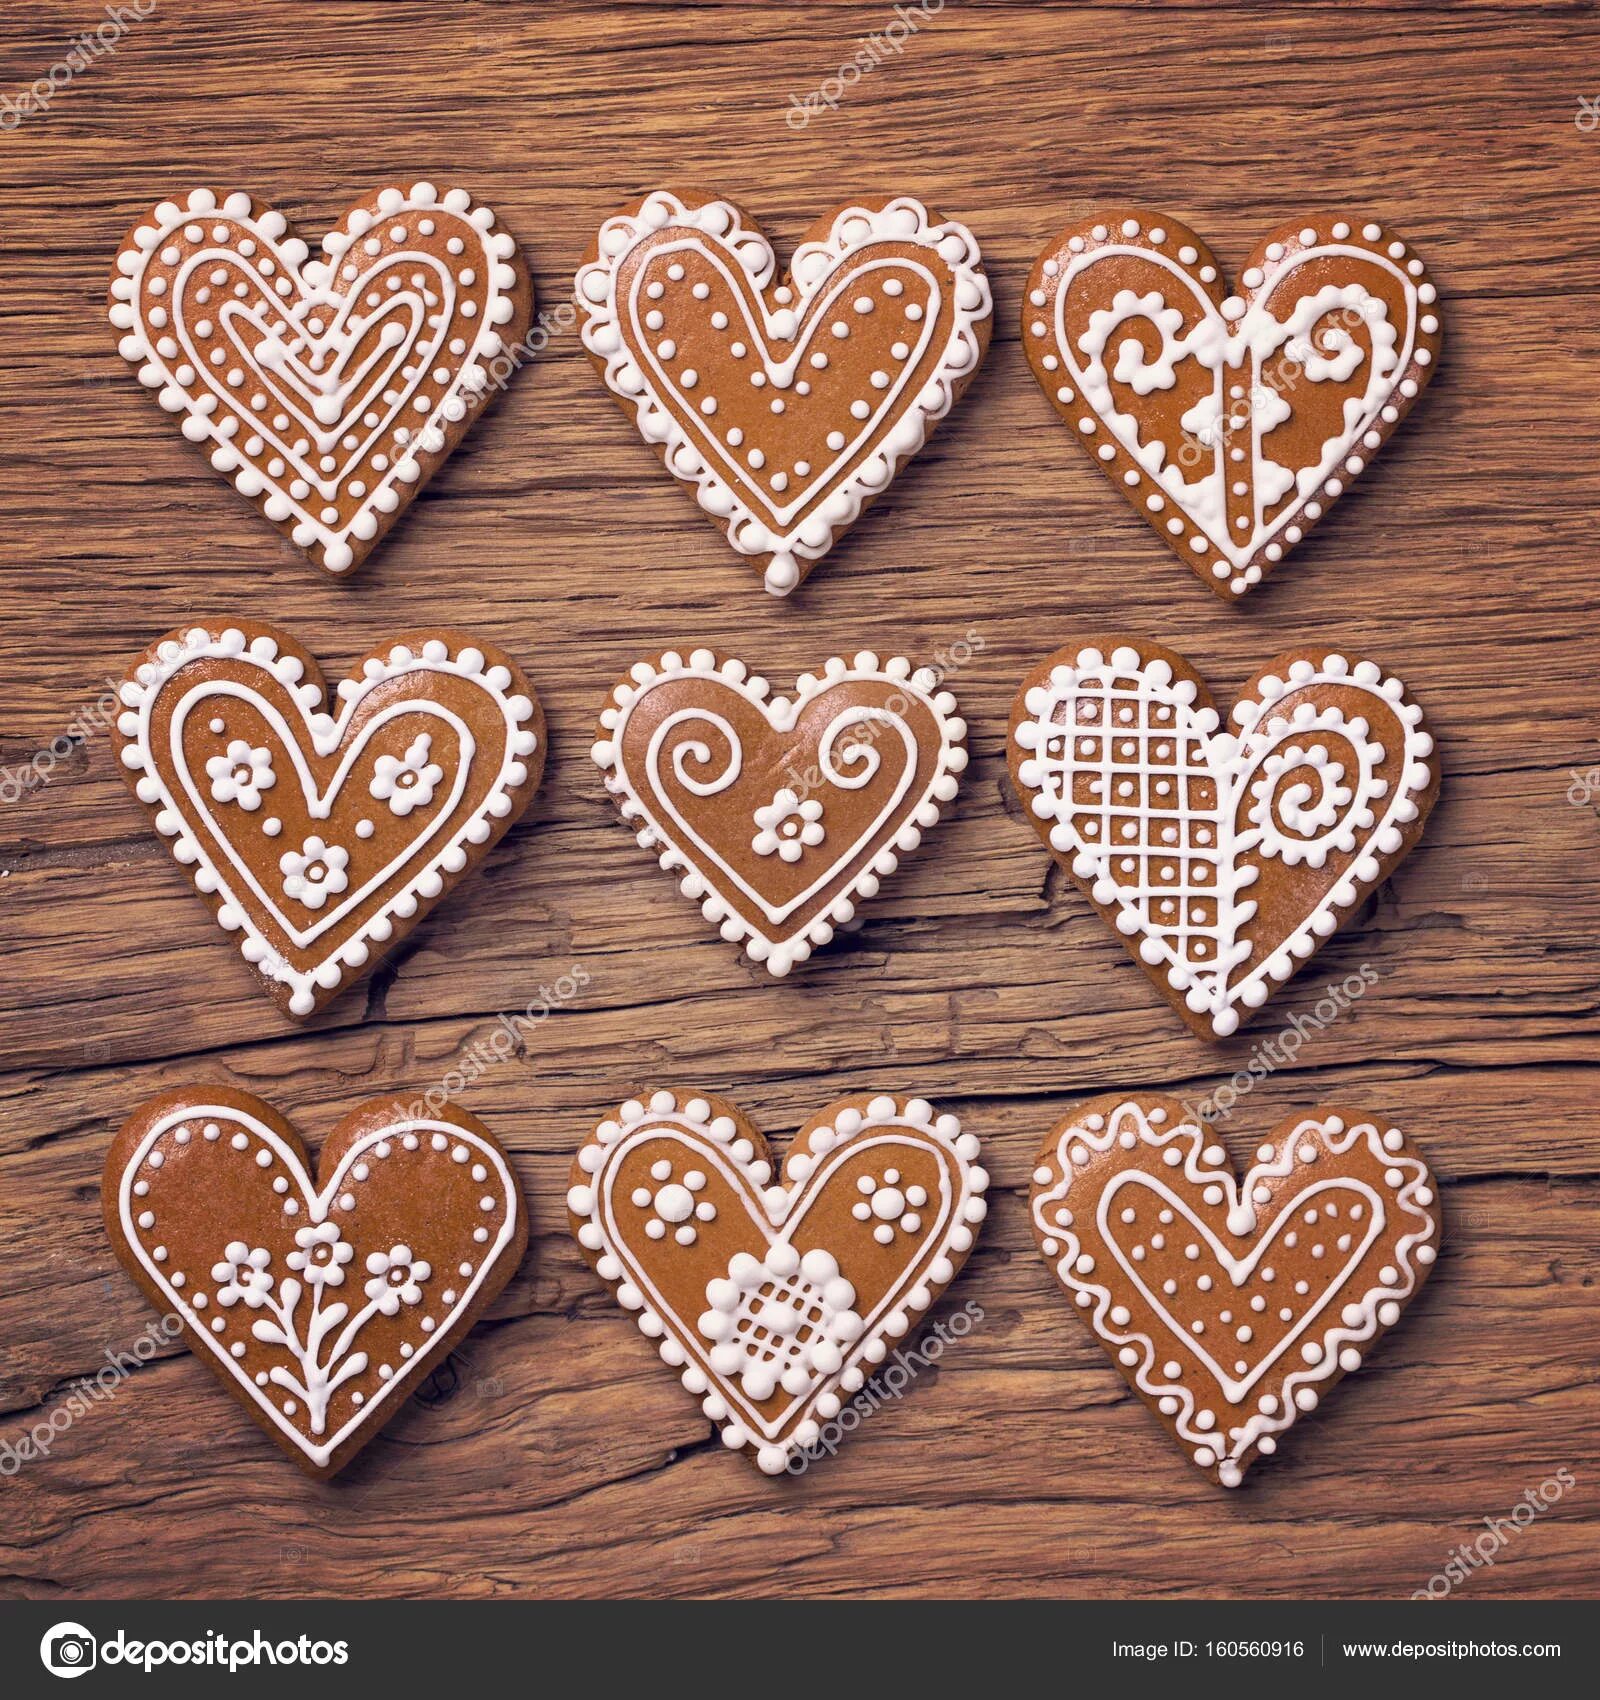 Inviting gingerbread icing coloring book